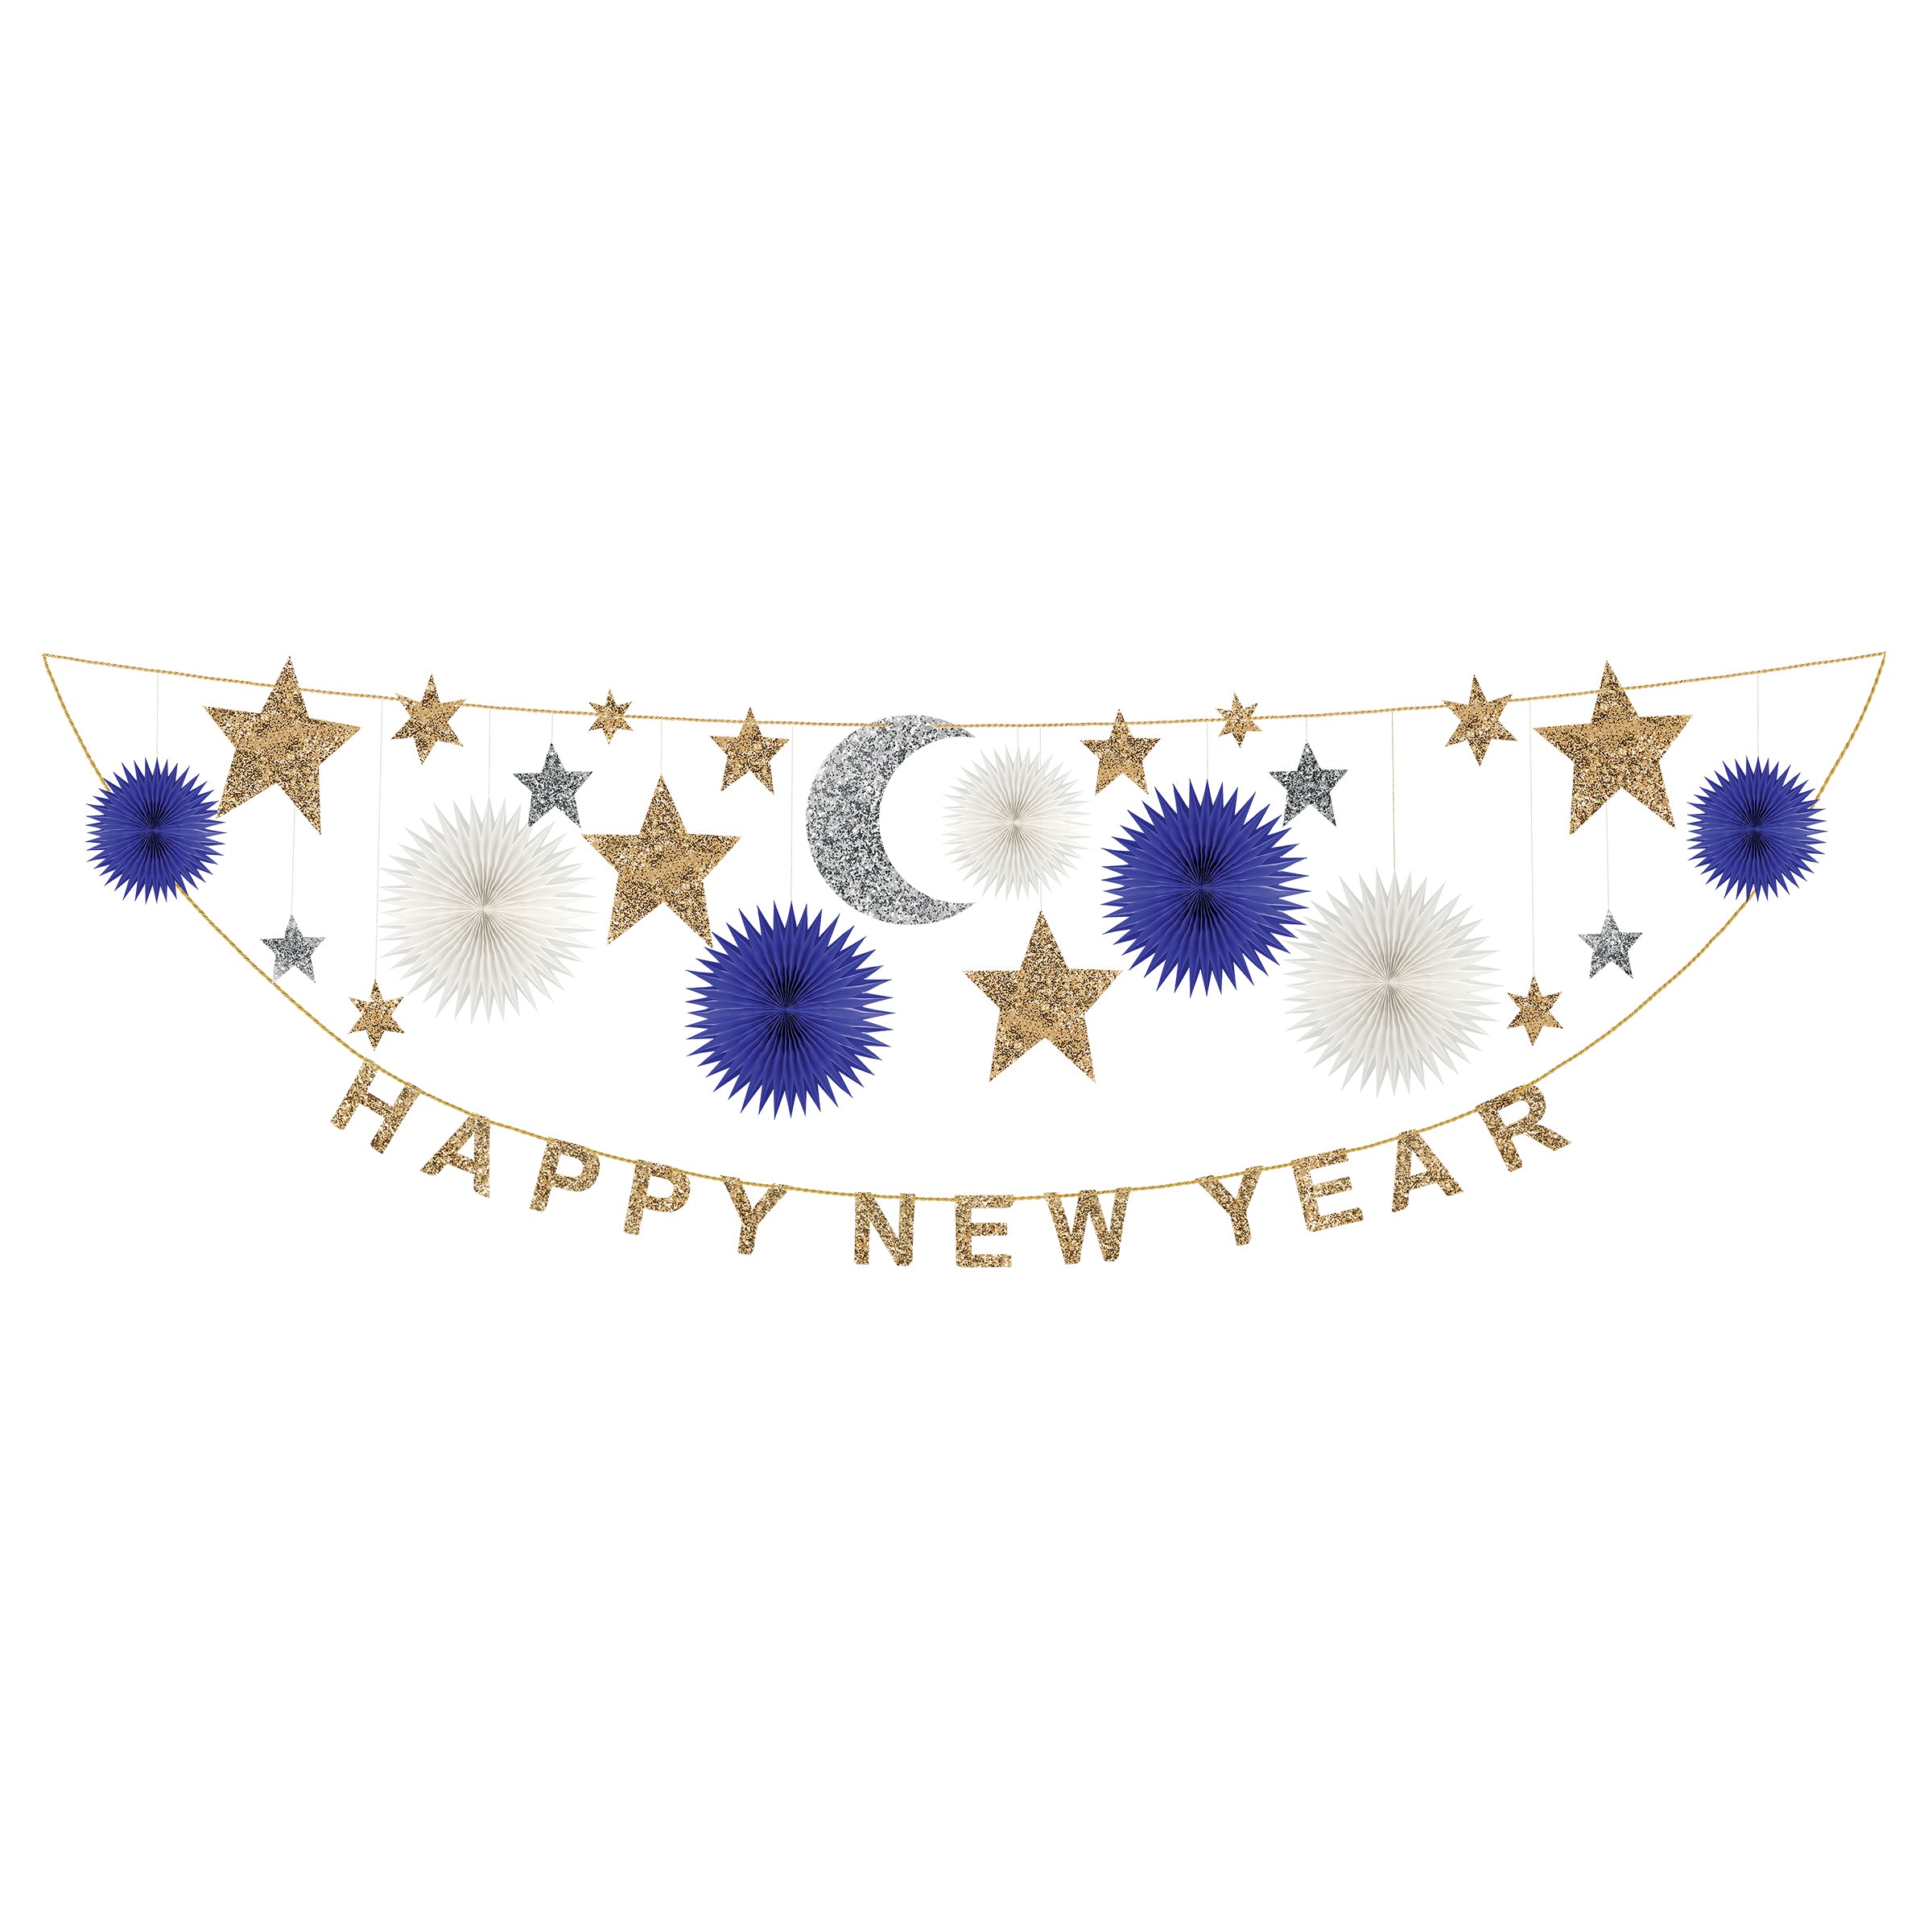 If you're looking for New Years party ideas you'll love our special party garland with silver and gold glitter and 3D stars.